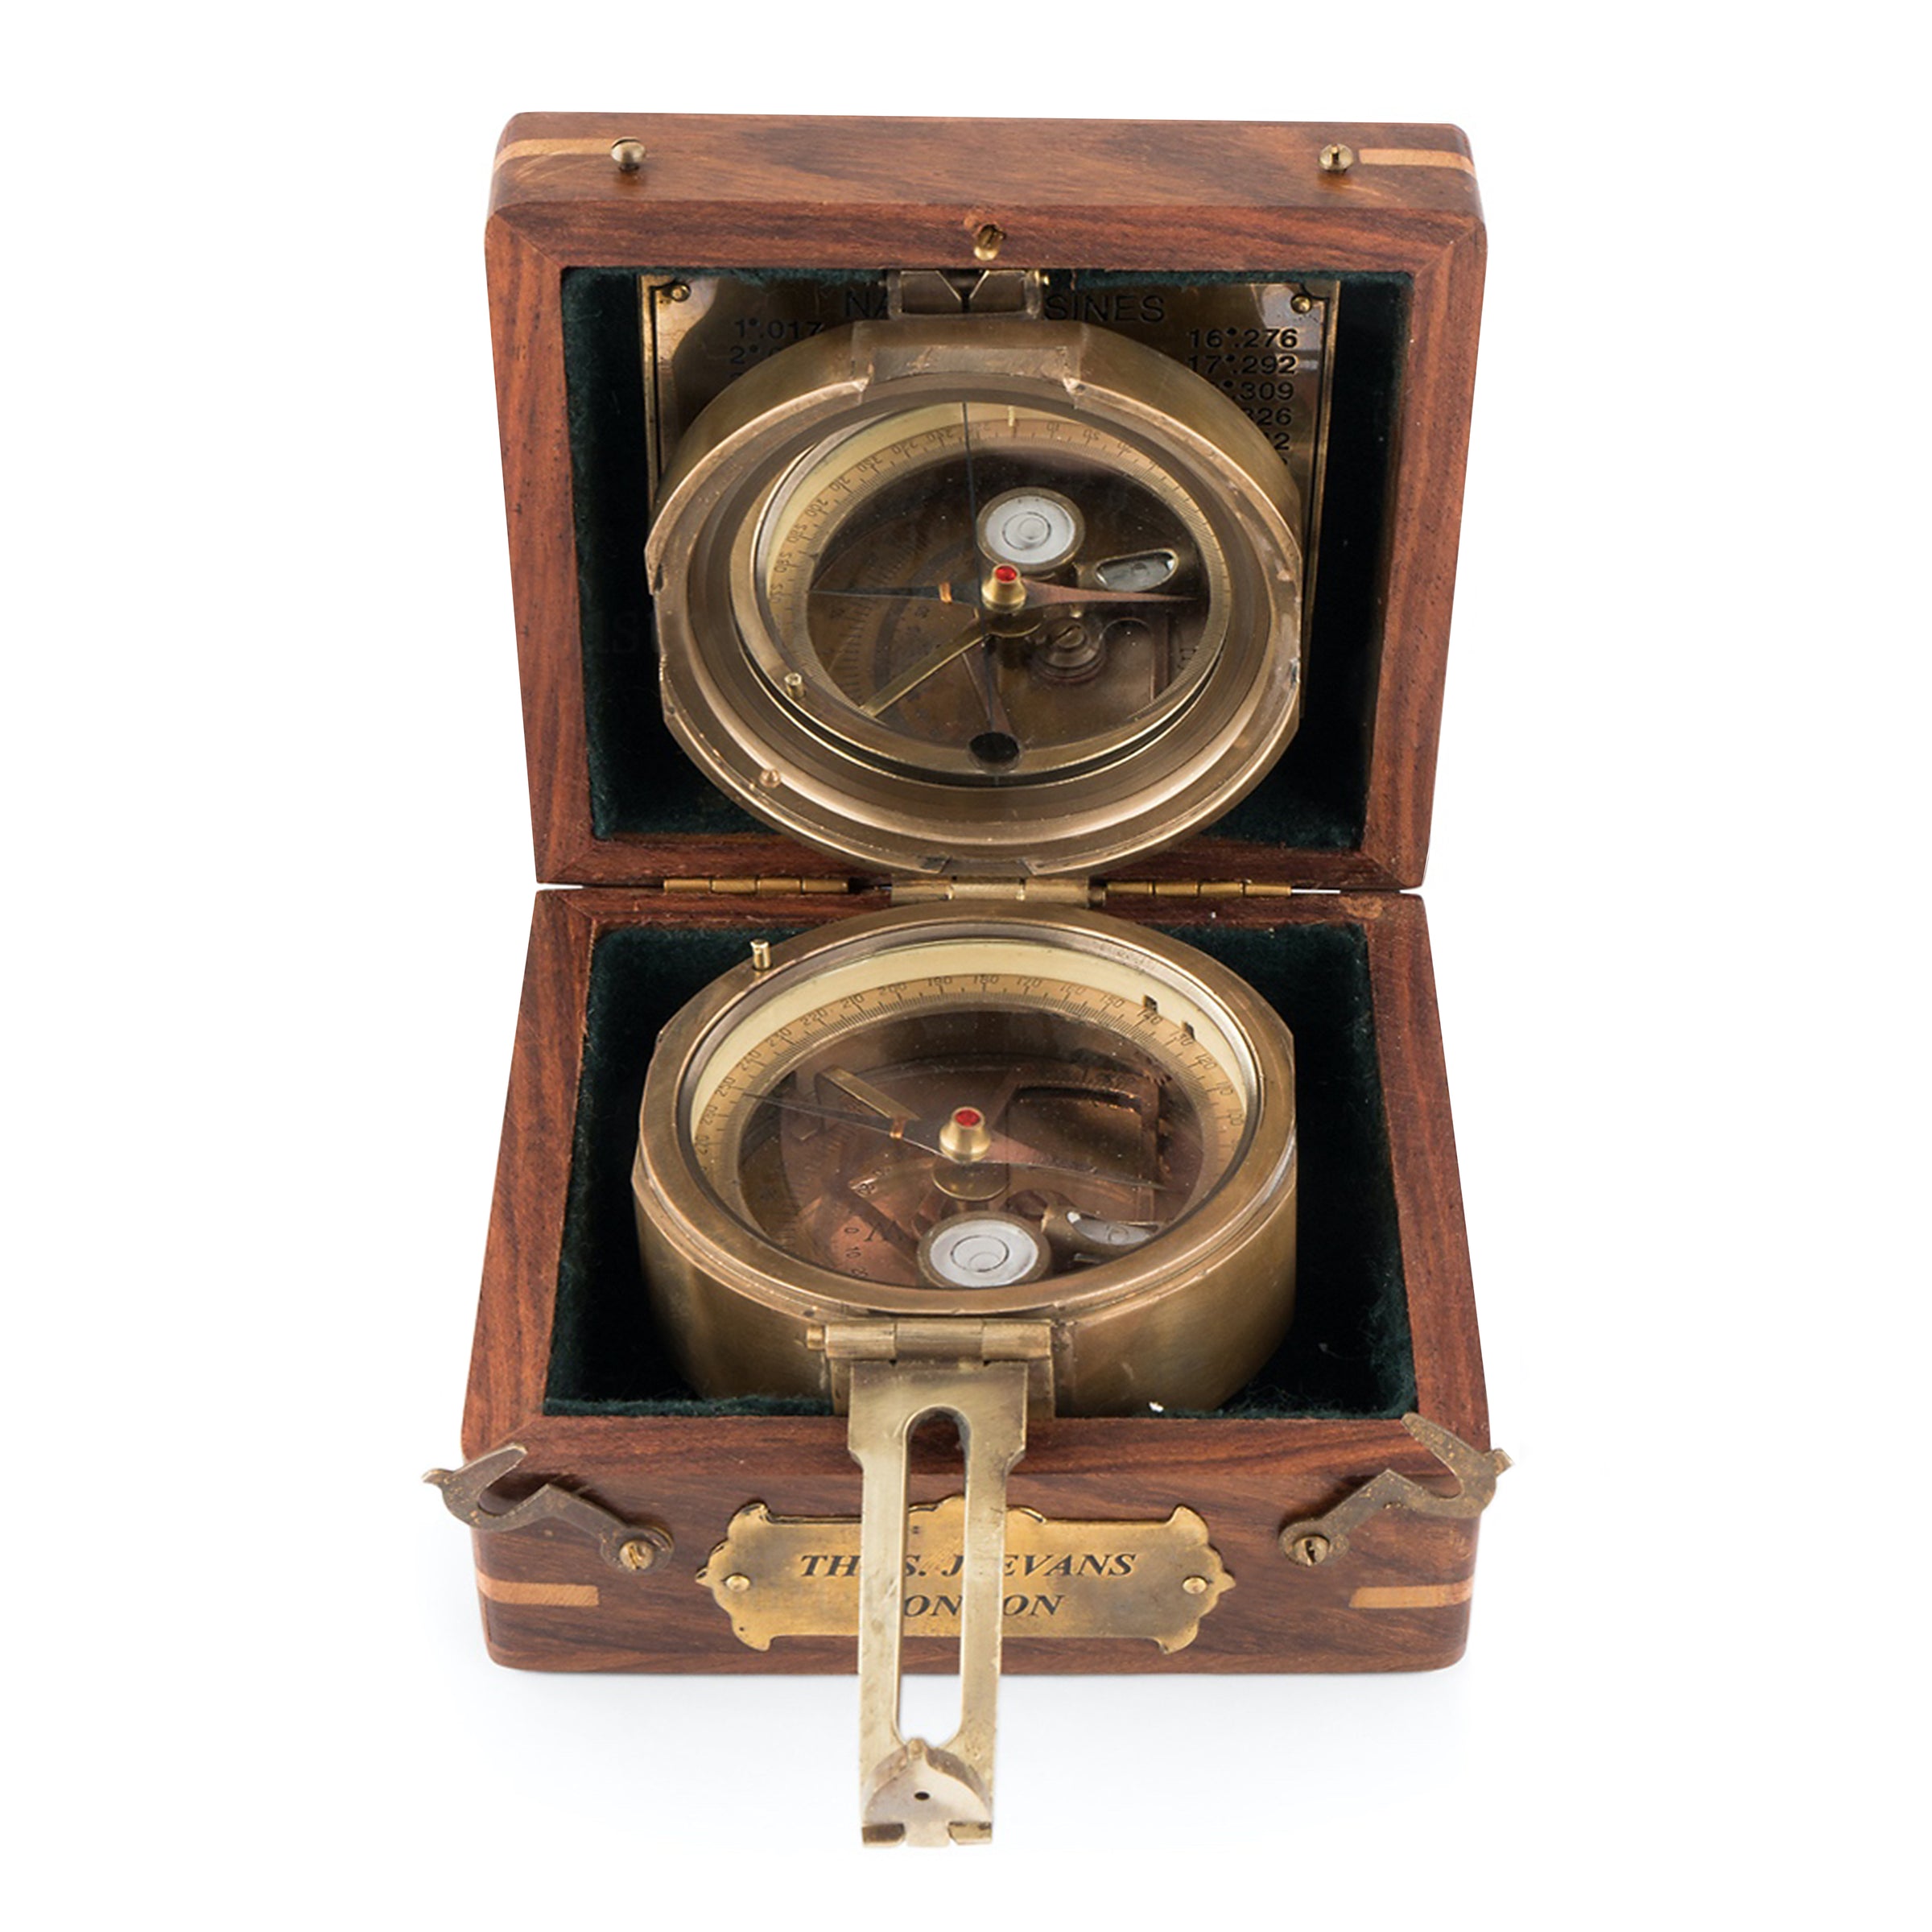 Sundial Prismatic Military Compass with Wooden Box - Notbrand